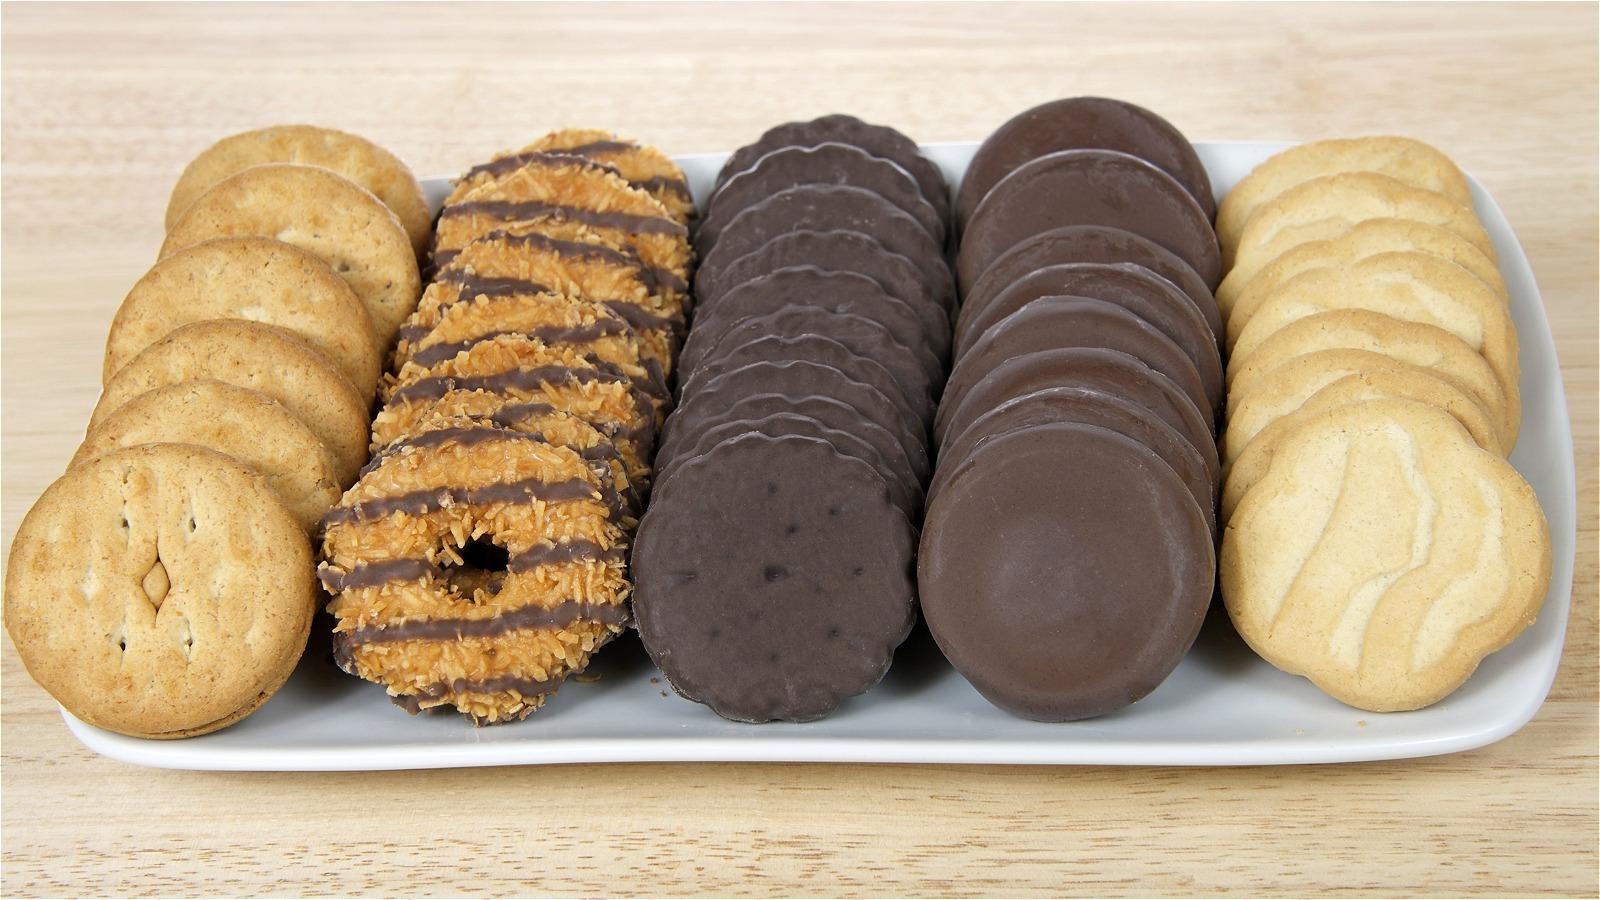 Girl Scout Cookie Season 2023 Kicks Off With New Raspberry Rally Flavor